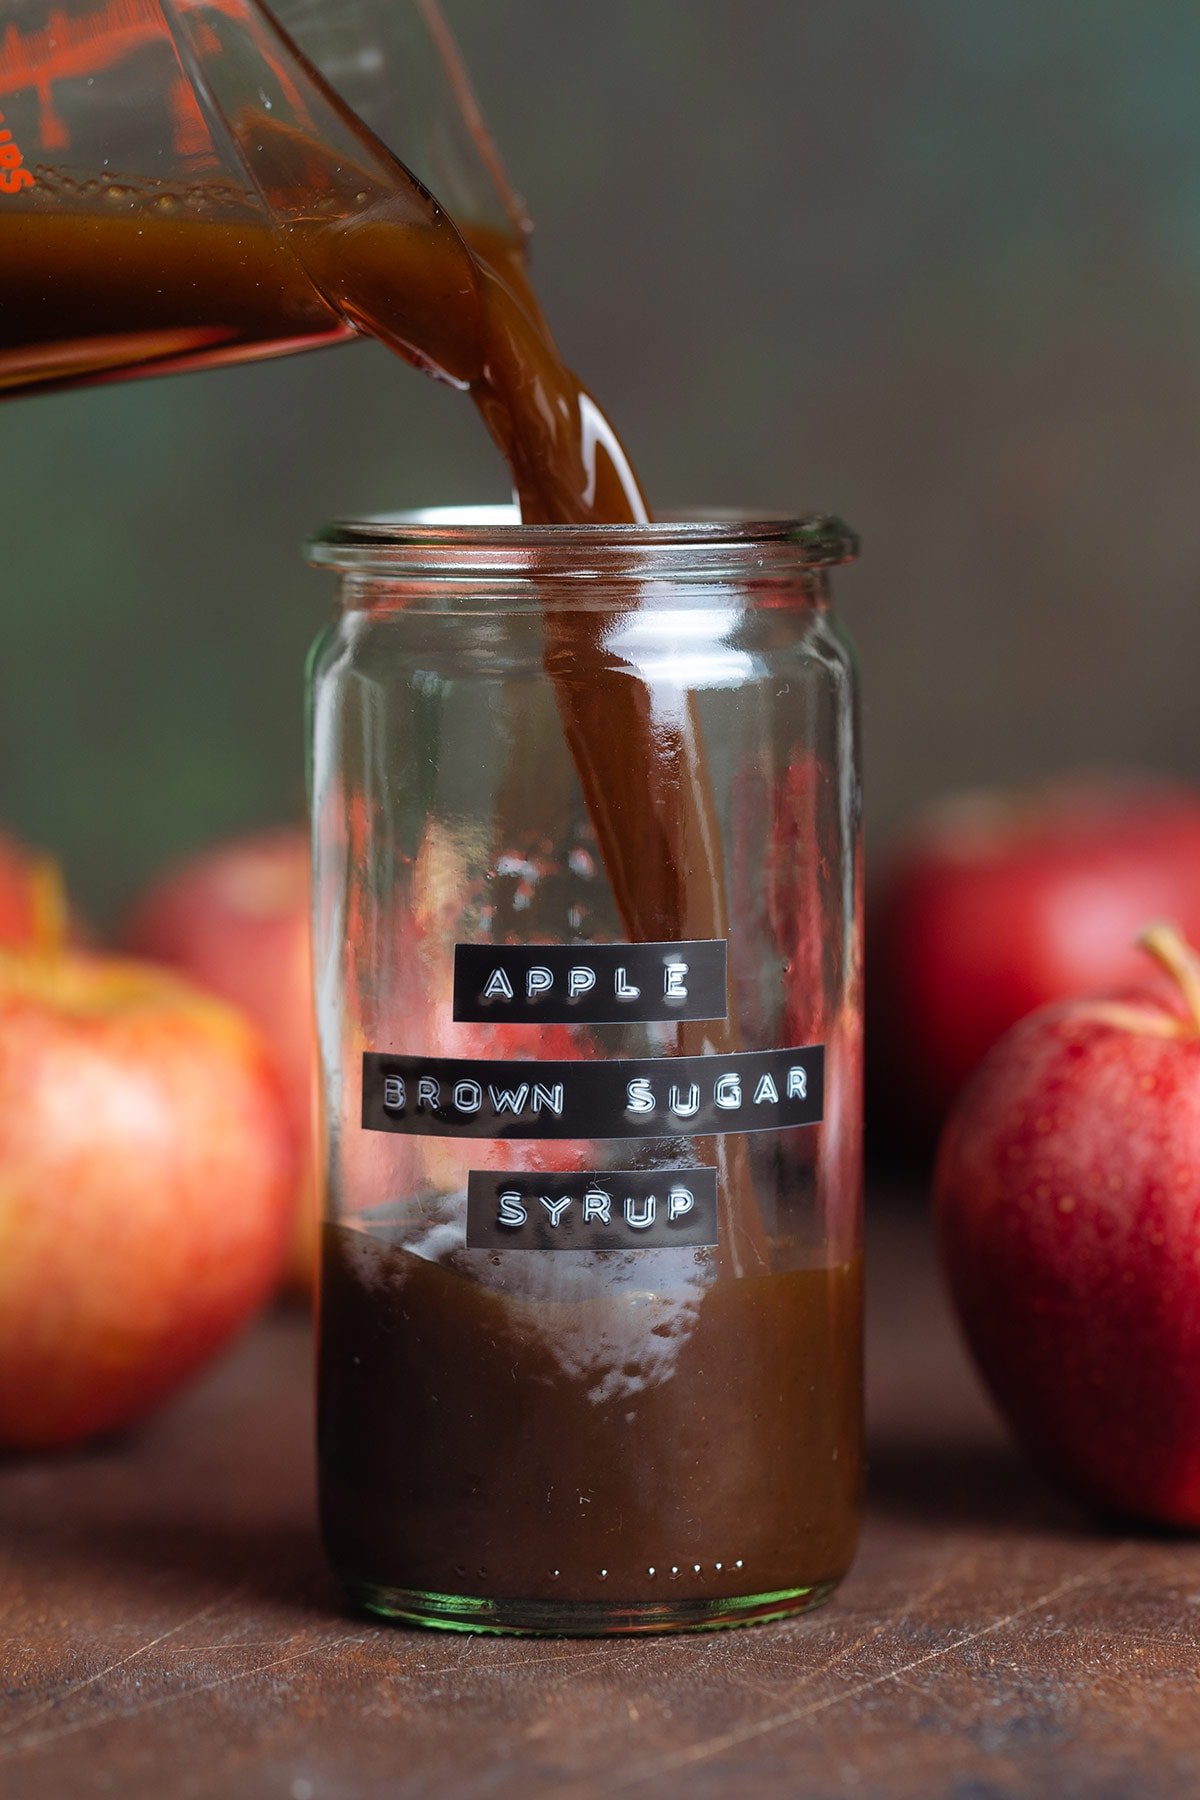 Dark brown syrup being poured into a glass jar with a label on it that says Apple Brown Sugar Syrup.